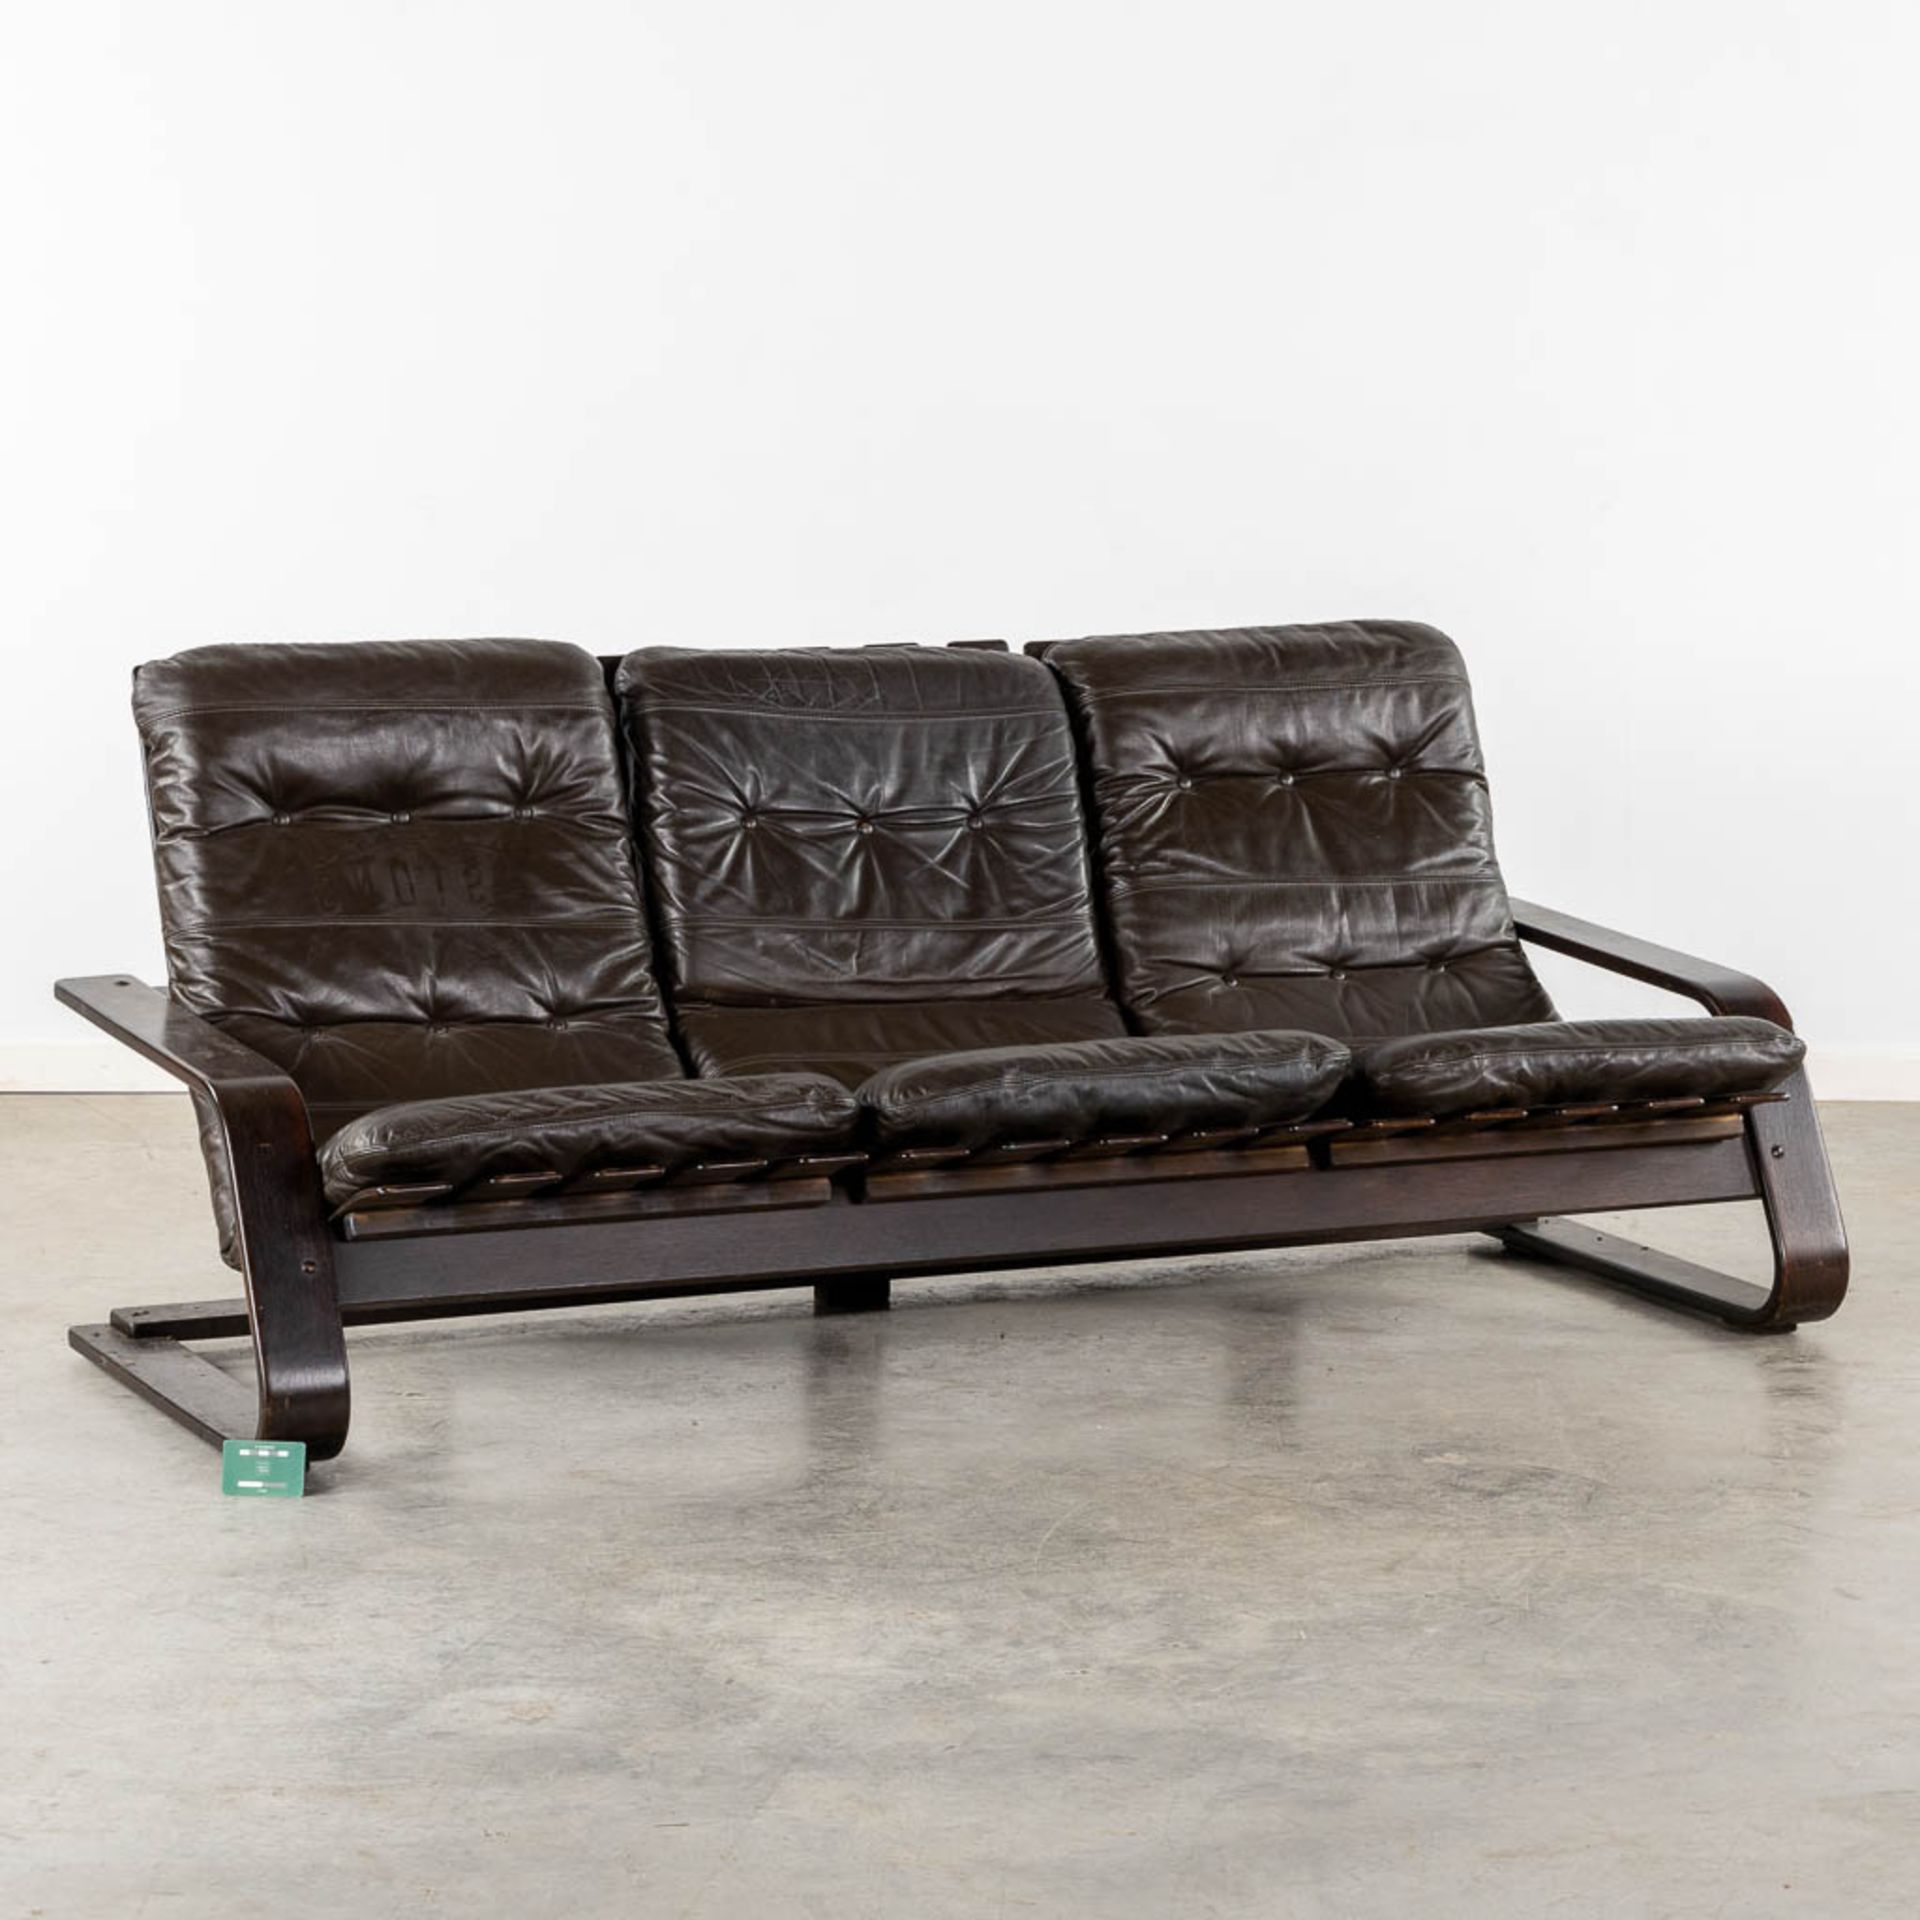 A three-person sofa, wood and leather. In the style of Westnova. (L:85 x W:192 x H:85 cm) - Bild 2 aus 9